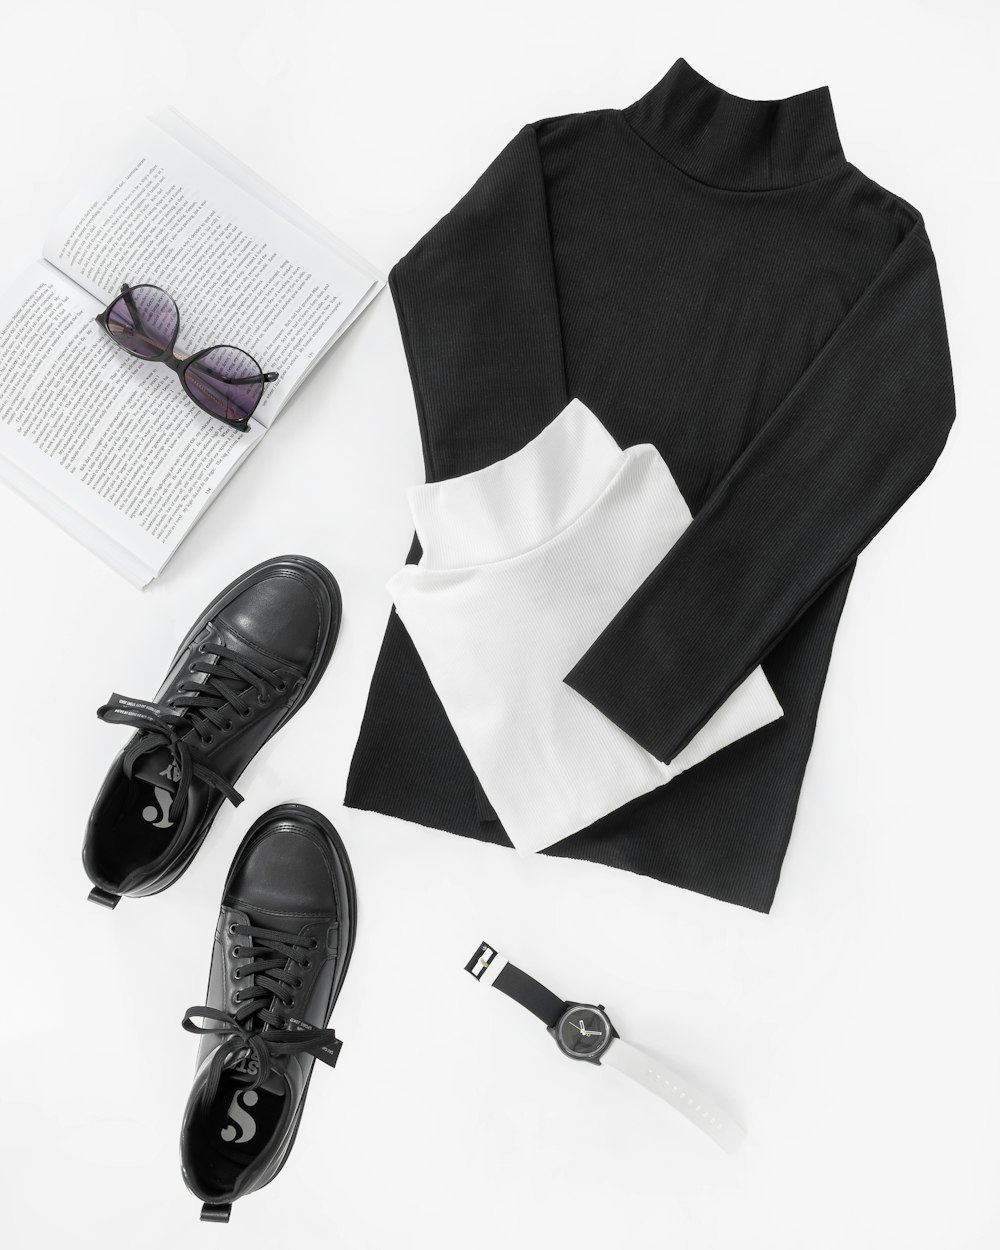 a pair of black shoes, a black sweater, and a pair of black sunglasses